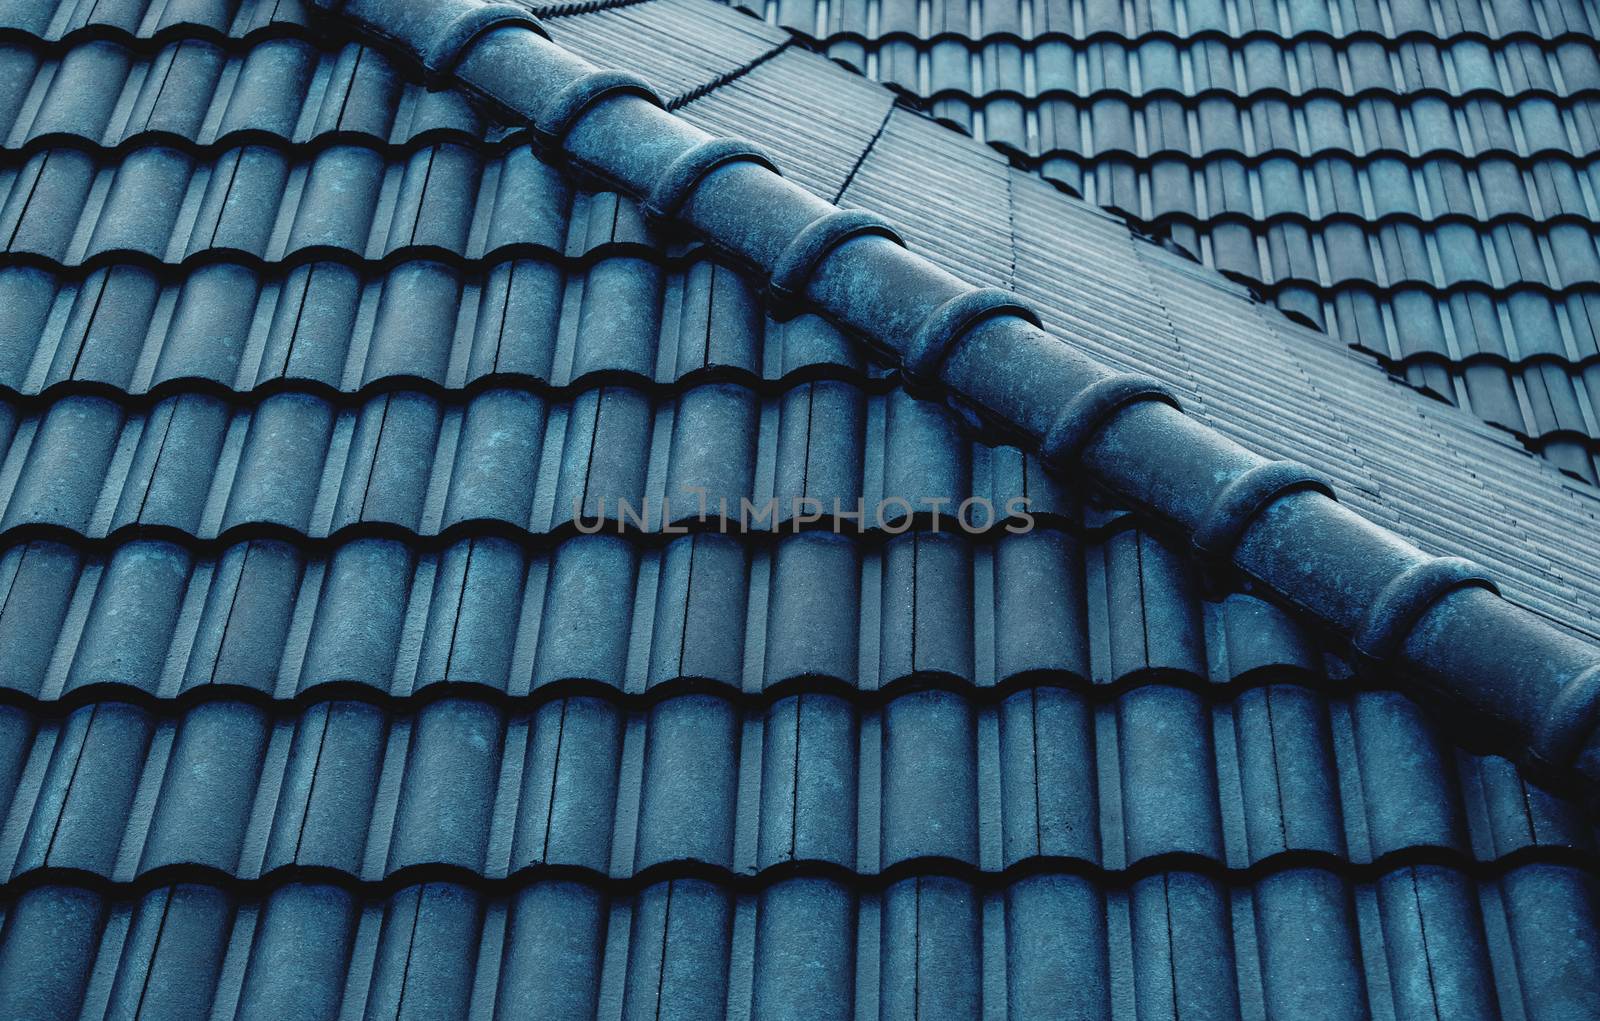 Wet Blue Tiles Roof Pattern. Shot on Rainy Day. Details of Architecture Concept